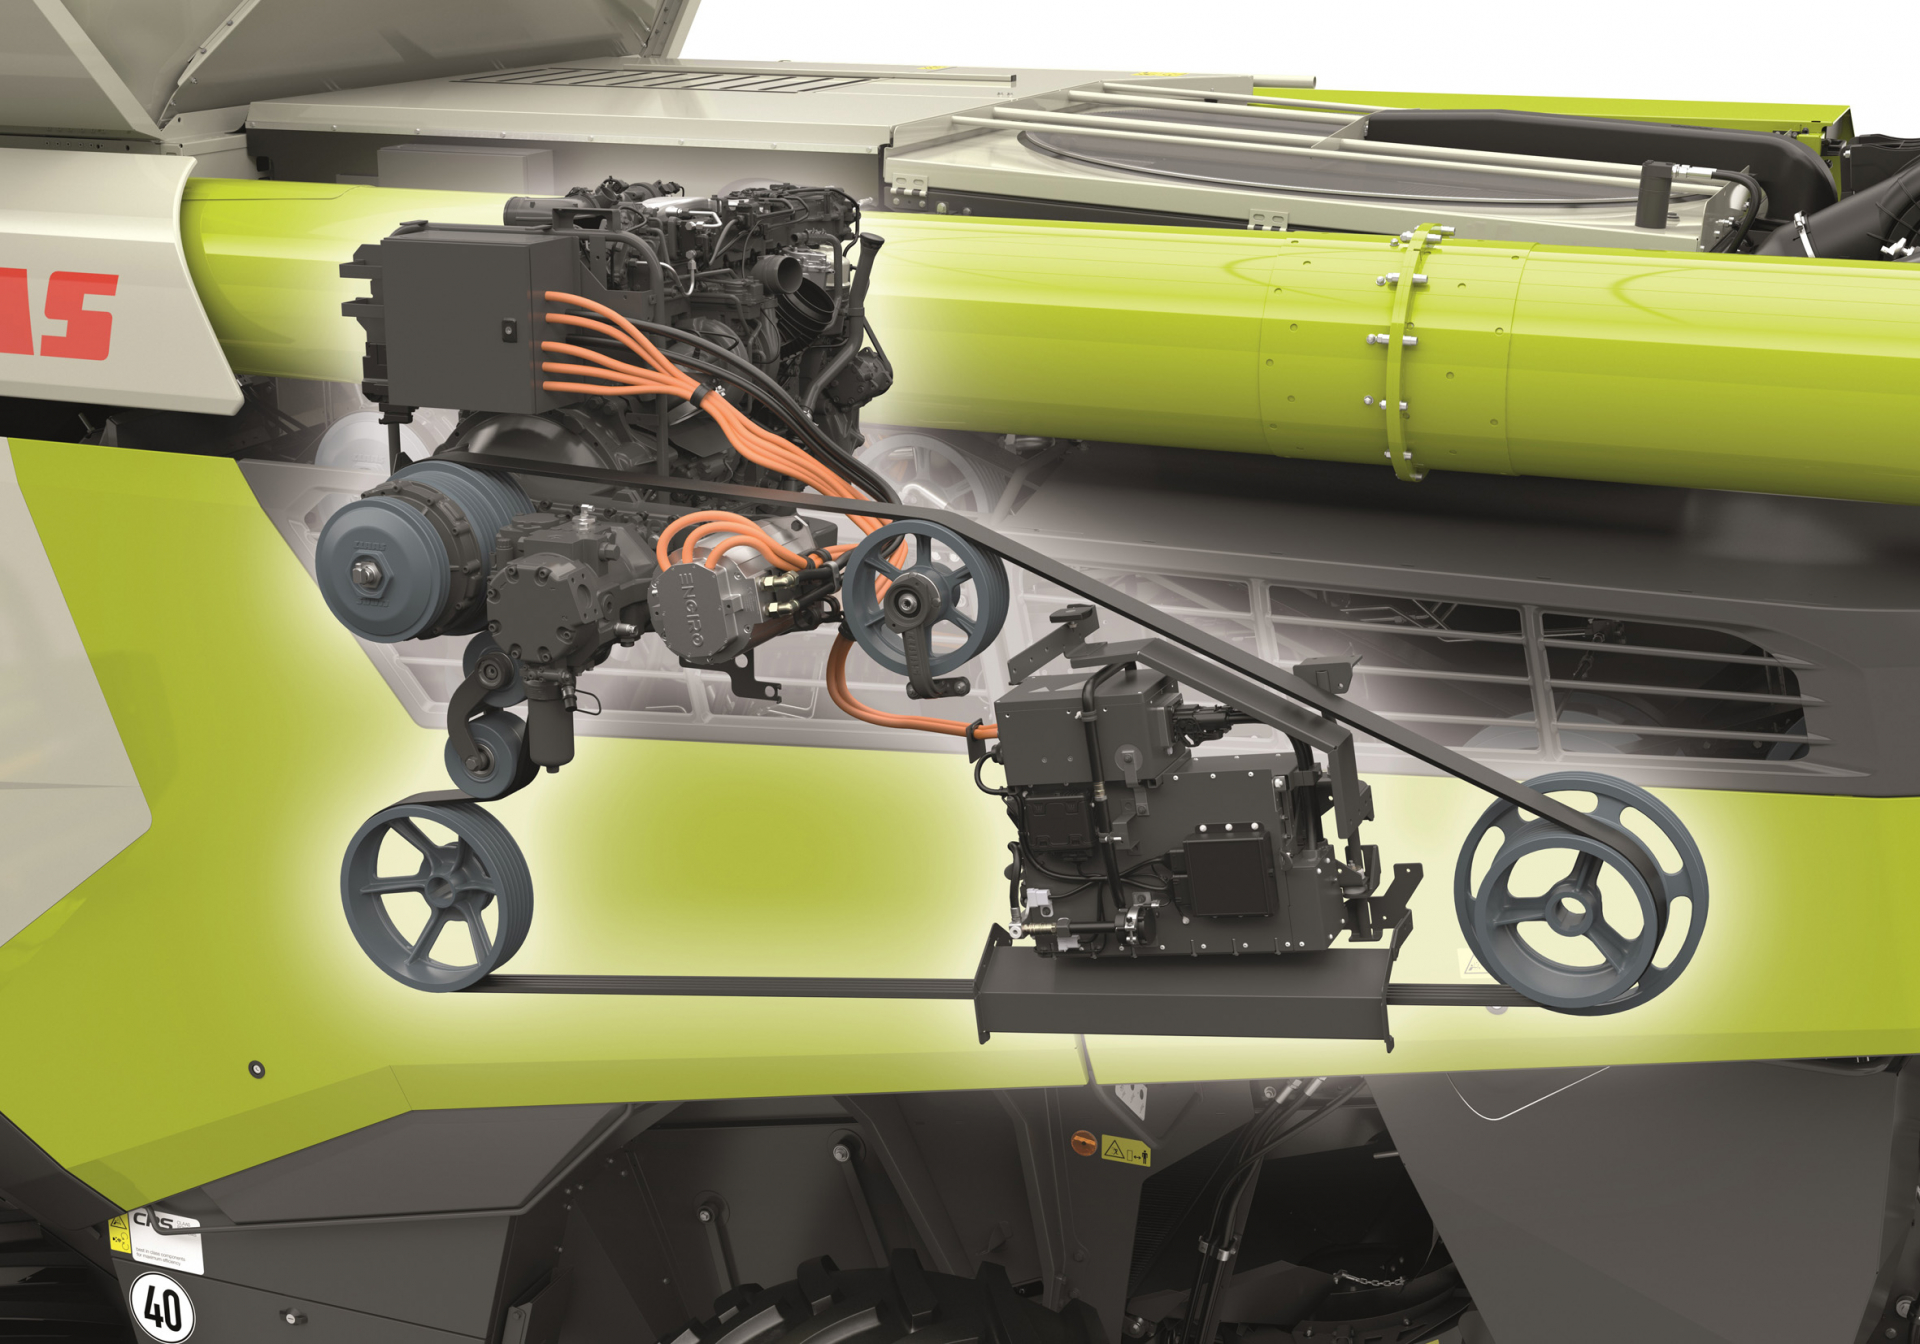 CLAAS _Partially electric drive for harvesting machinery 01.jpg